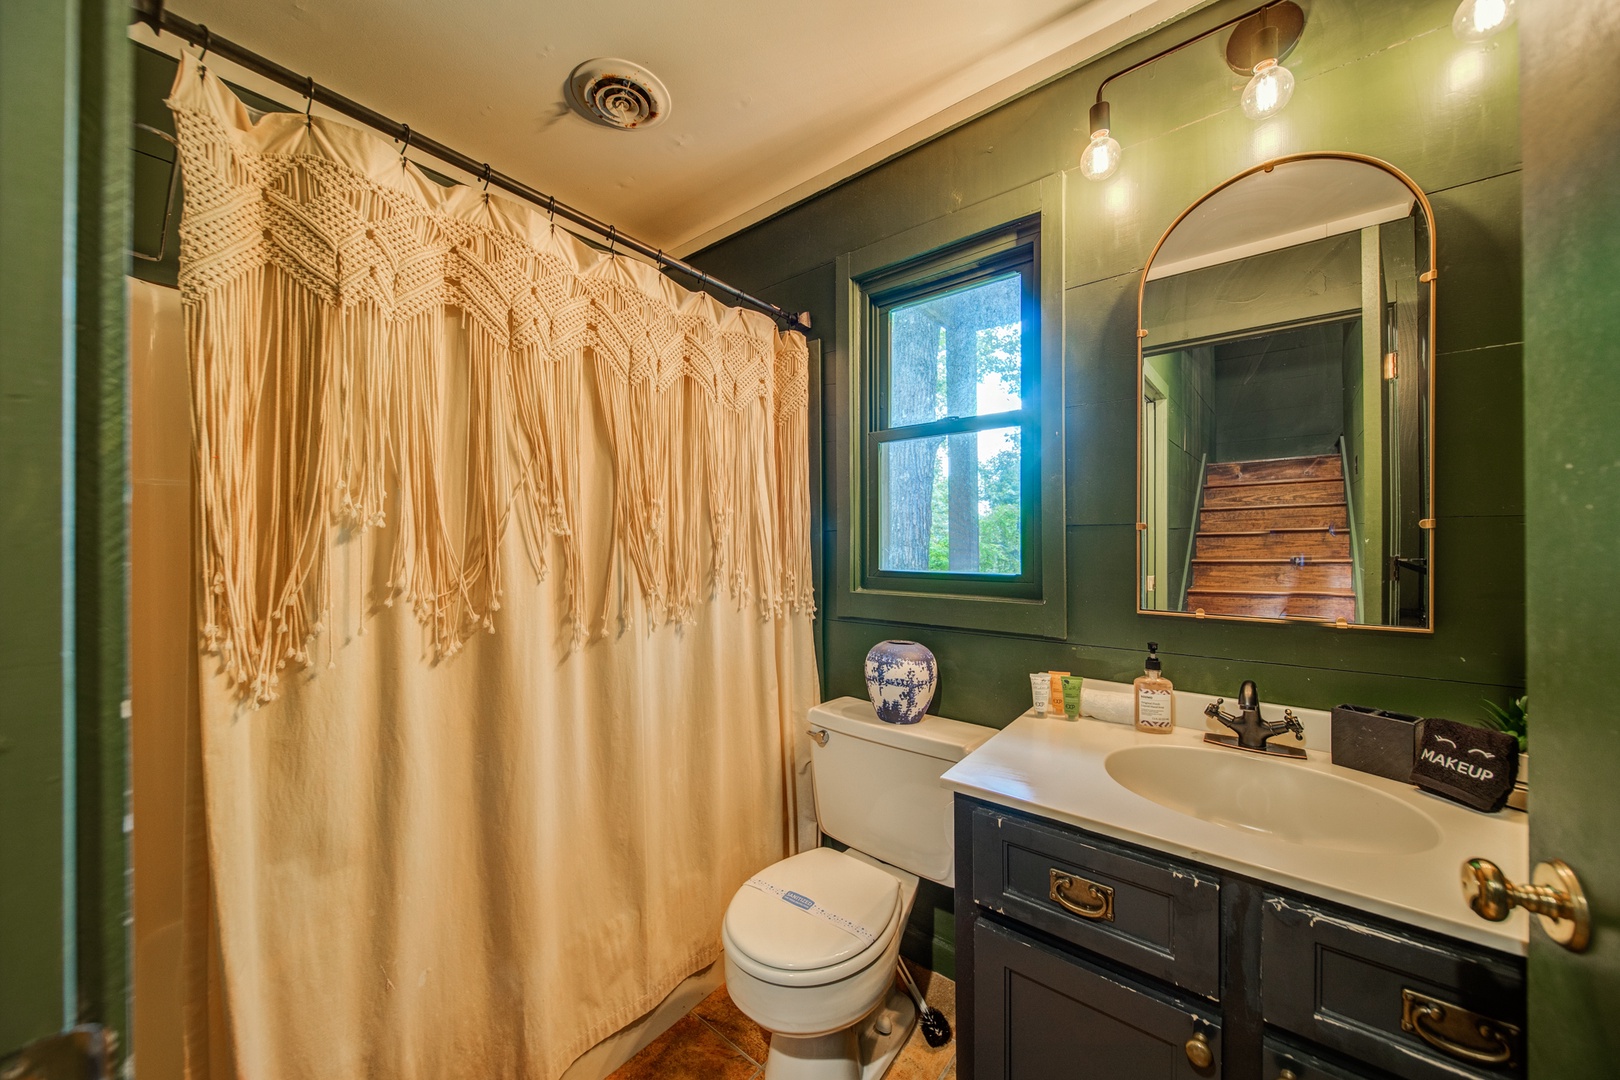 The lower level boasts an additional full bathroom with shower/tub combo